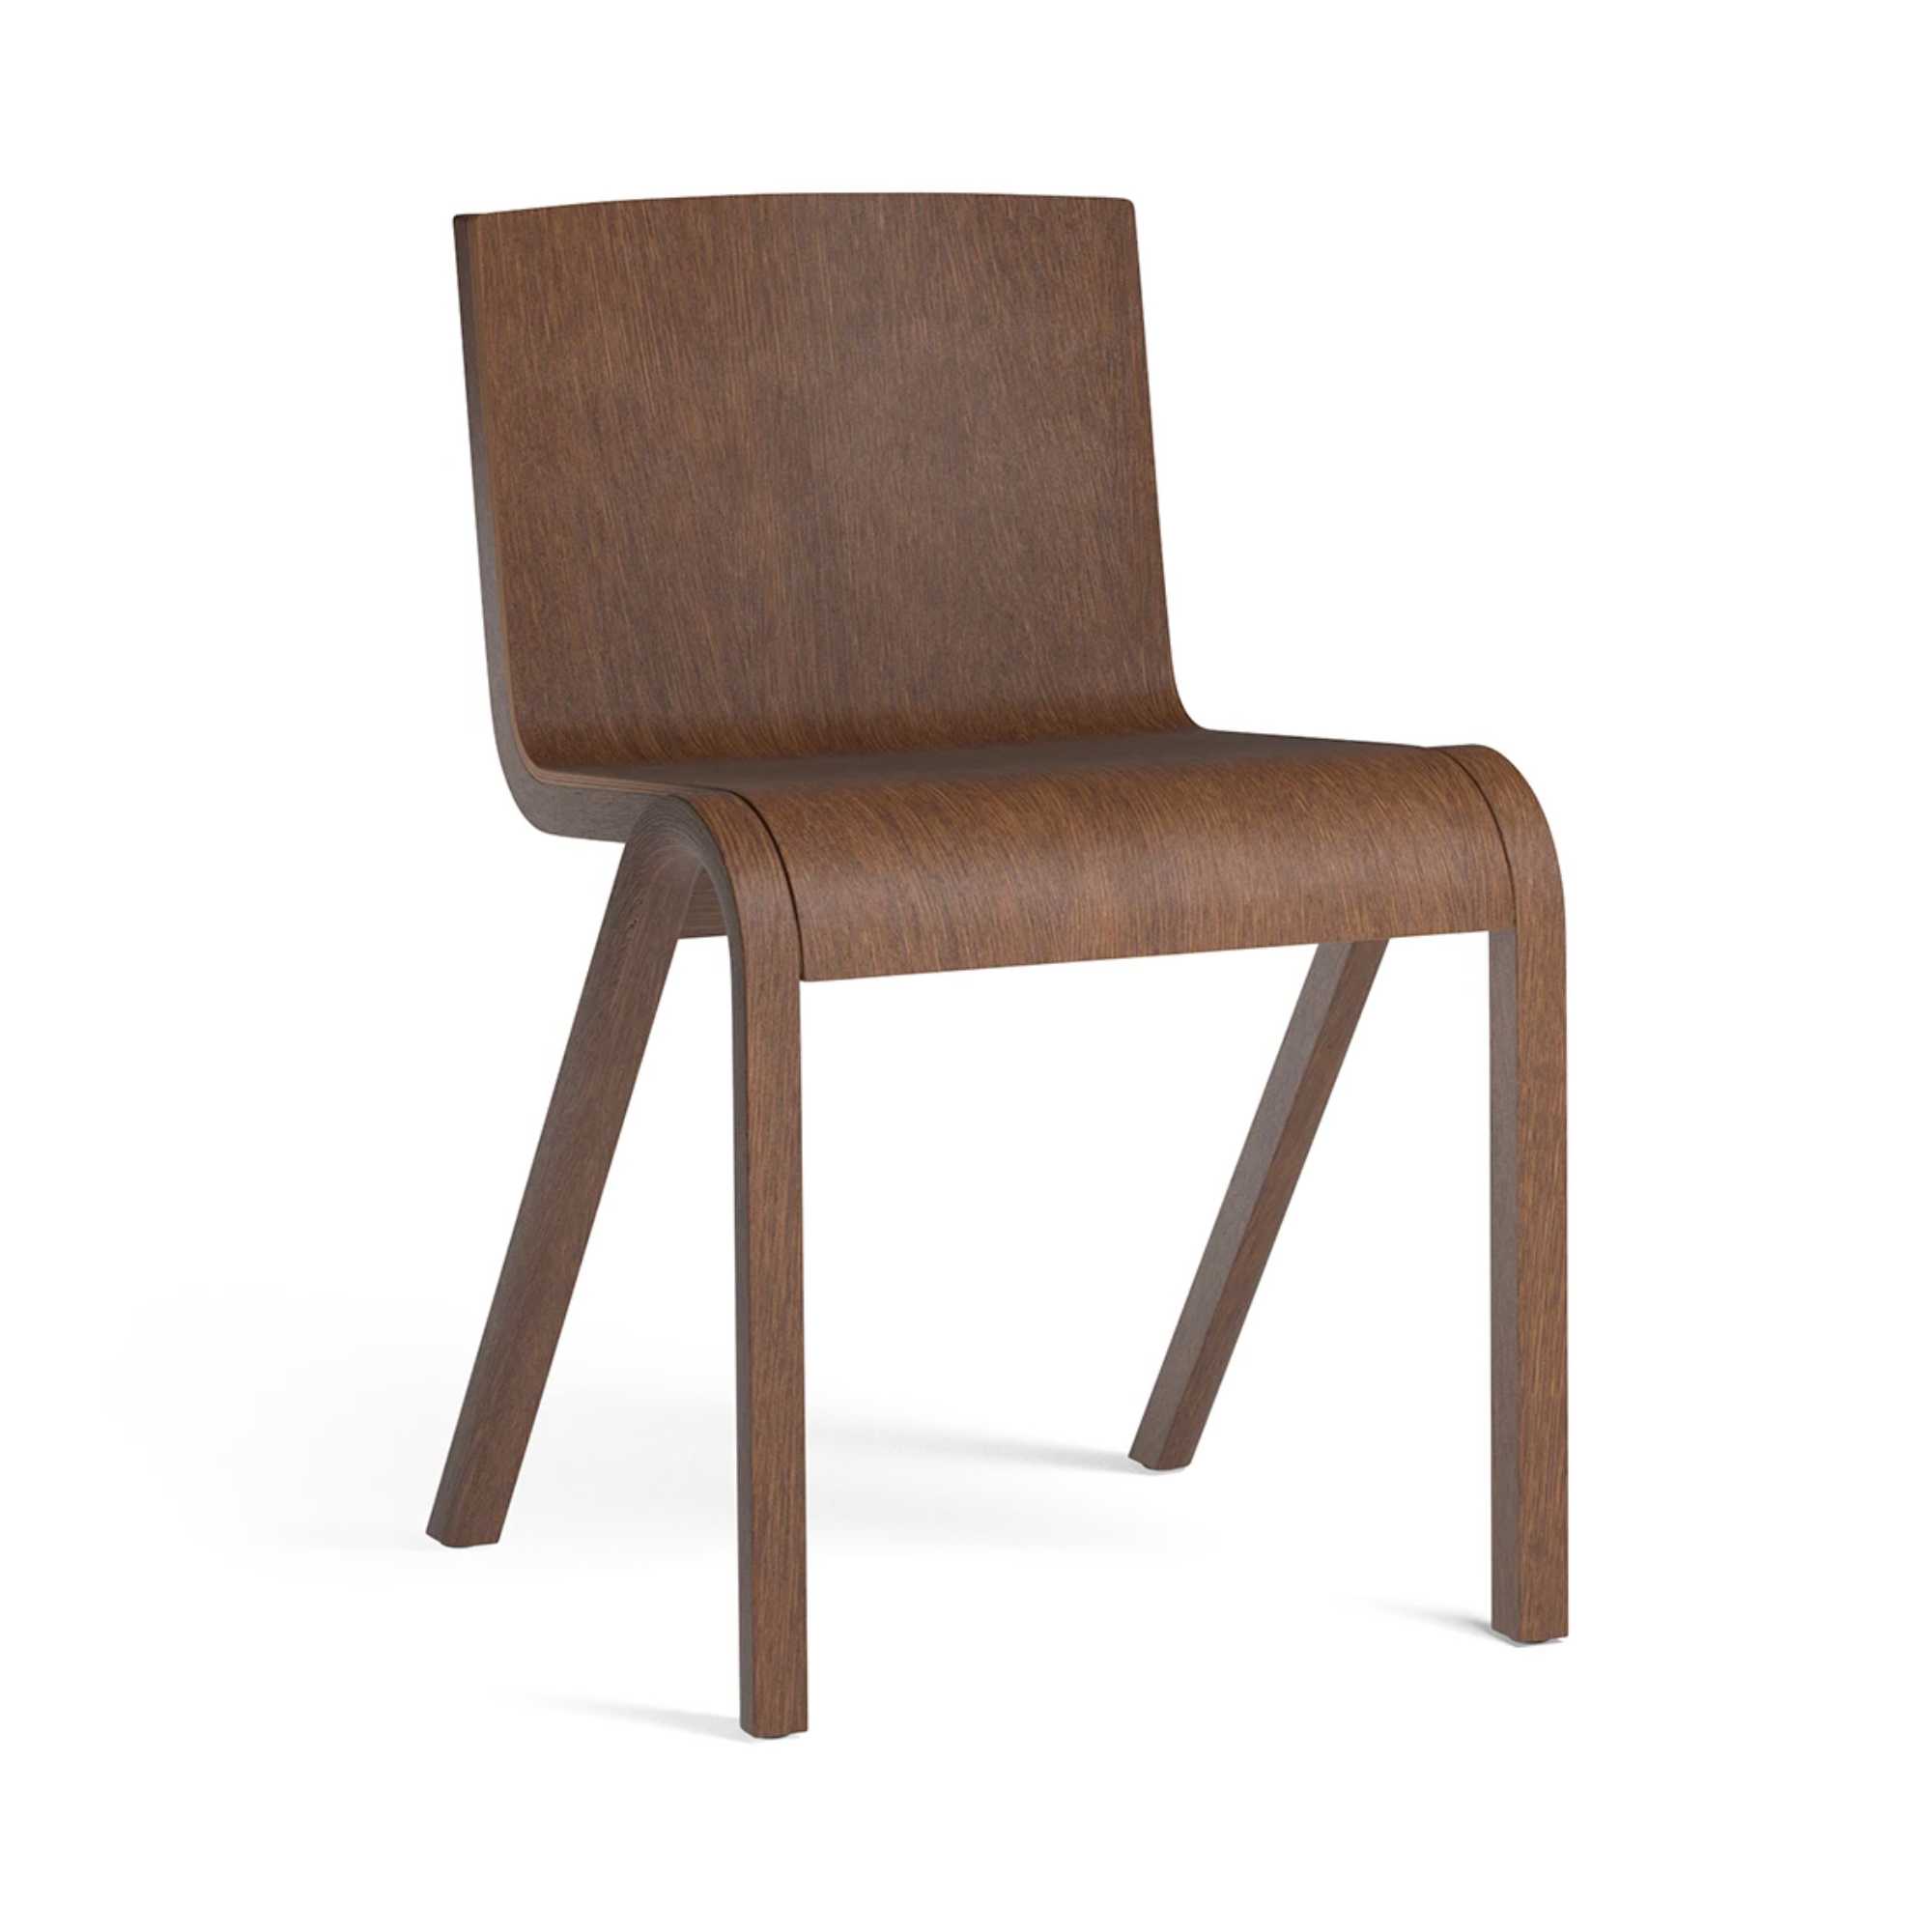 Audo Copenhagen Ready dining chair, red stained oak